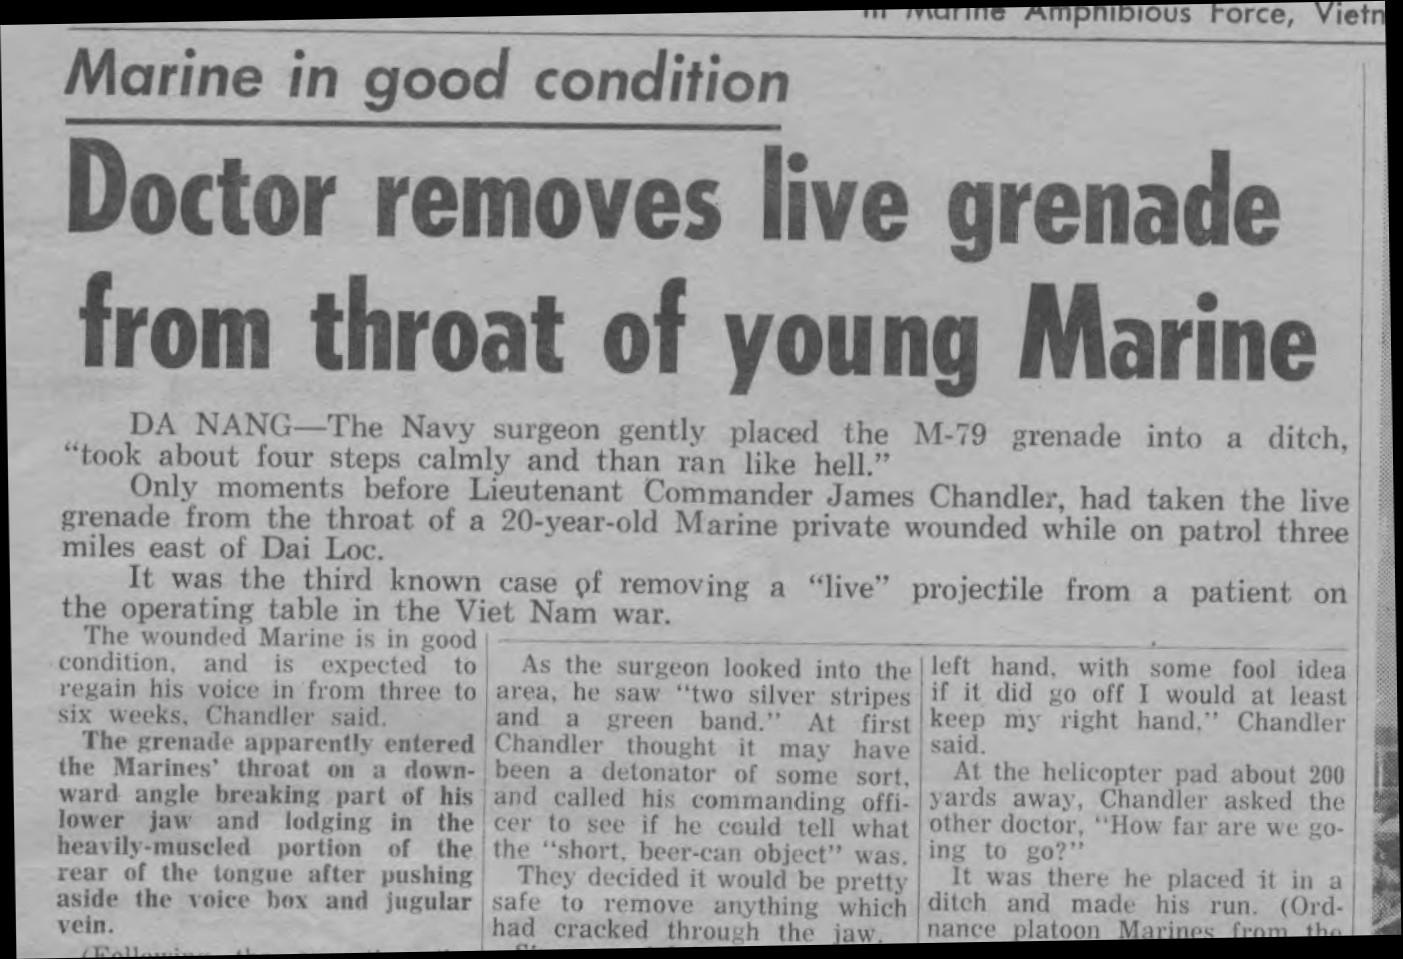 Article from Sea Lion December 28 1966